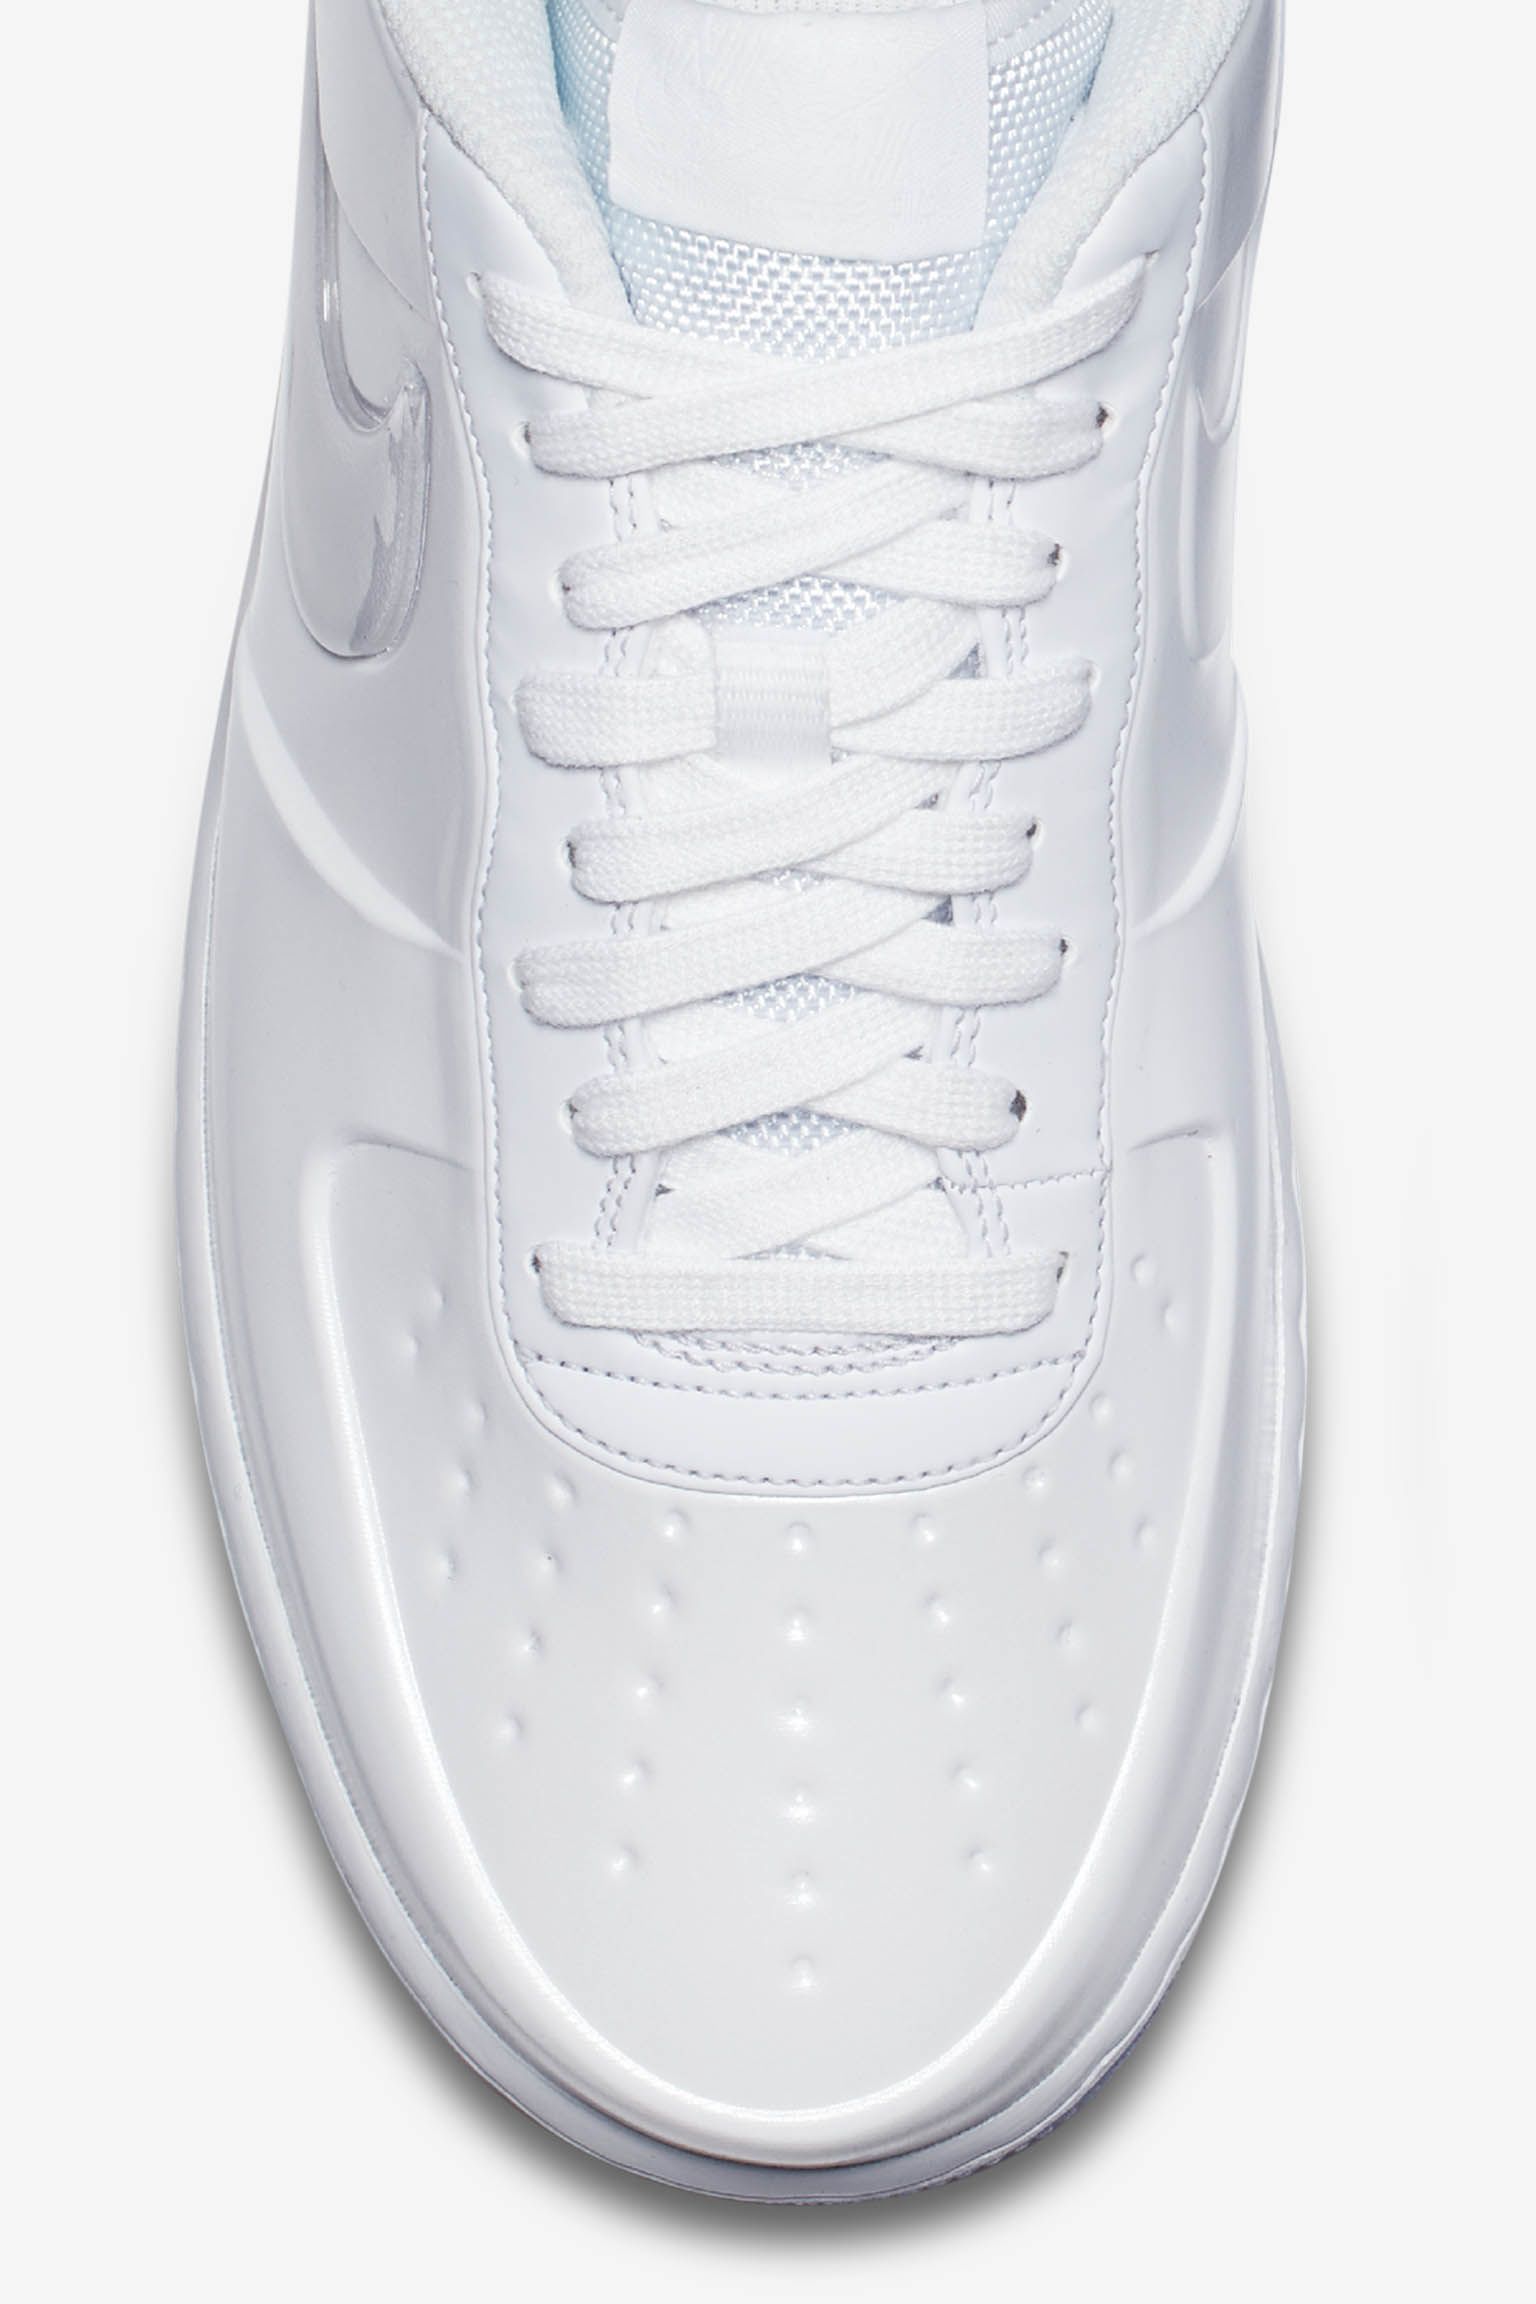 Nike Air Force 1 Foamposite Pro Cup 'Triple White' Release Date. Nike SNKRS